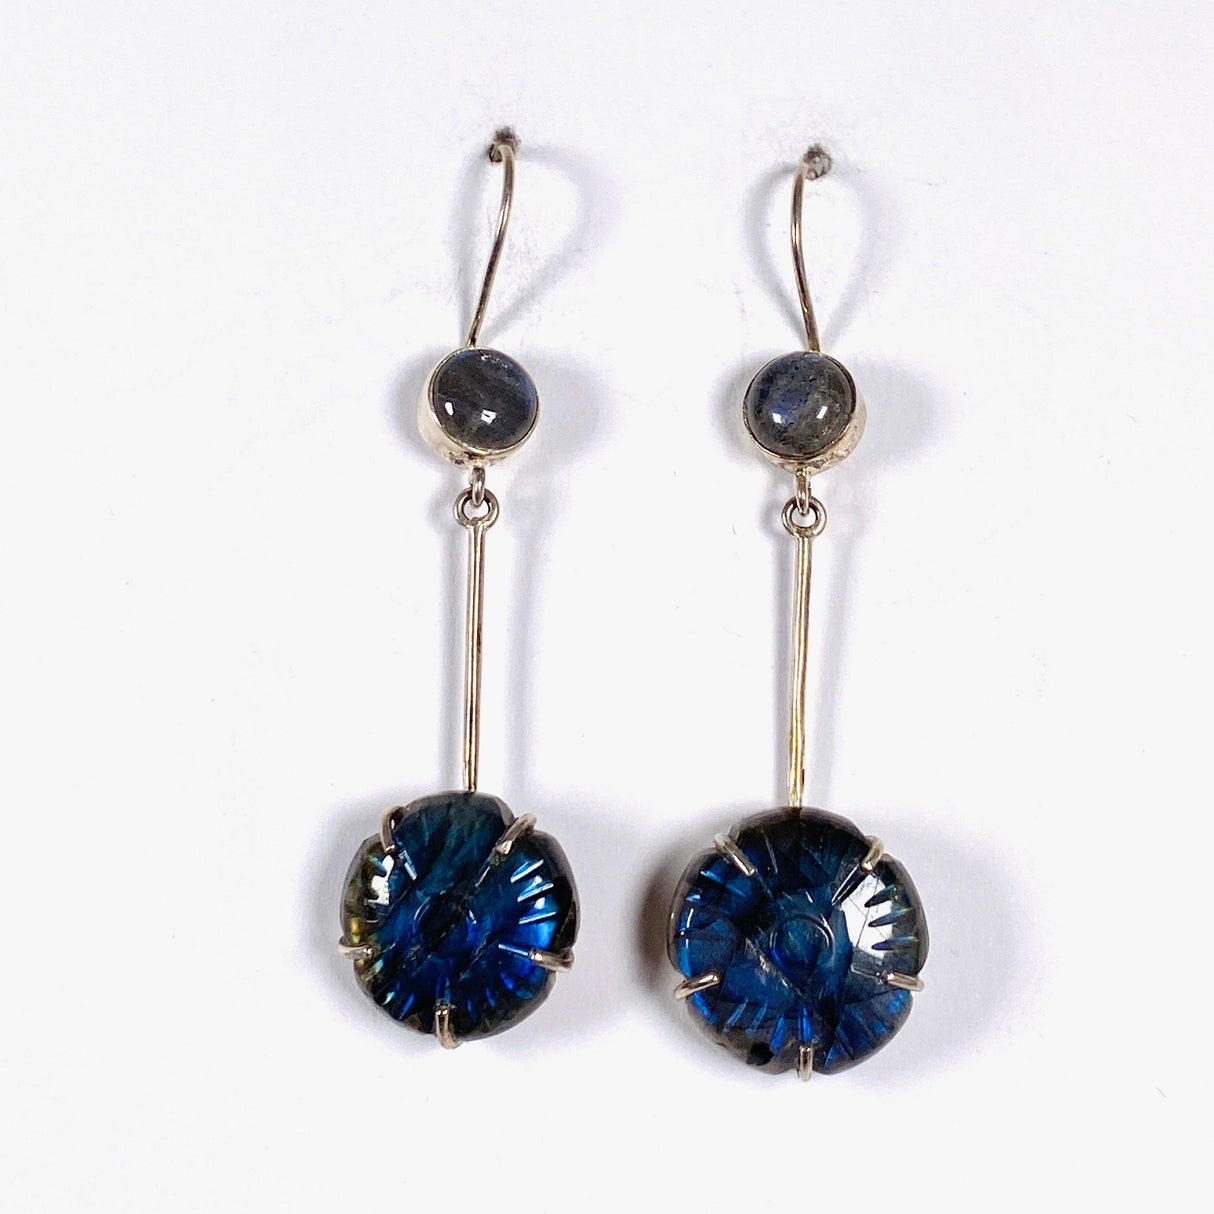 Labradorite and silver earrings with blue flower carving at the bottom with a silver stem going up to a small round labradoite gemstone with a fixed hookl going through a piece of white cardboard